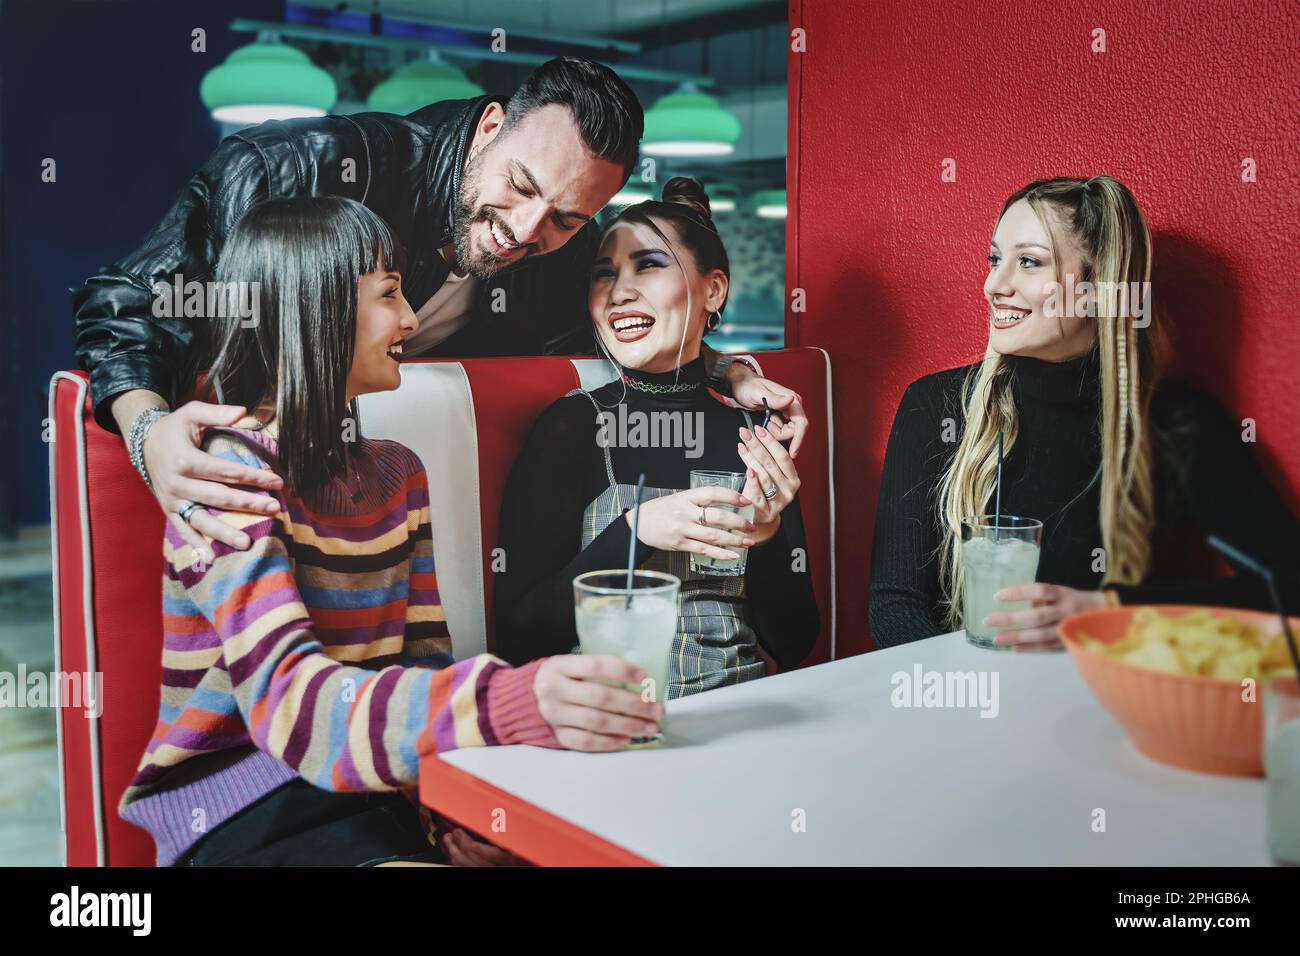 Three female friends enjoy cocktails at a 90s themed game bar, a smiling male friend approaches and hugs two of them, pool tables in the background. Stock Photo